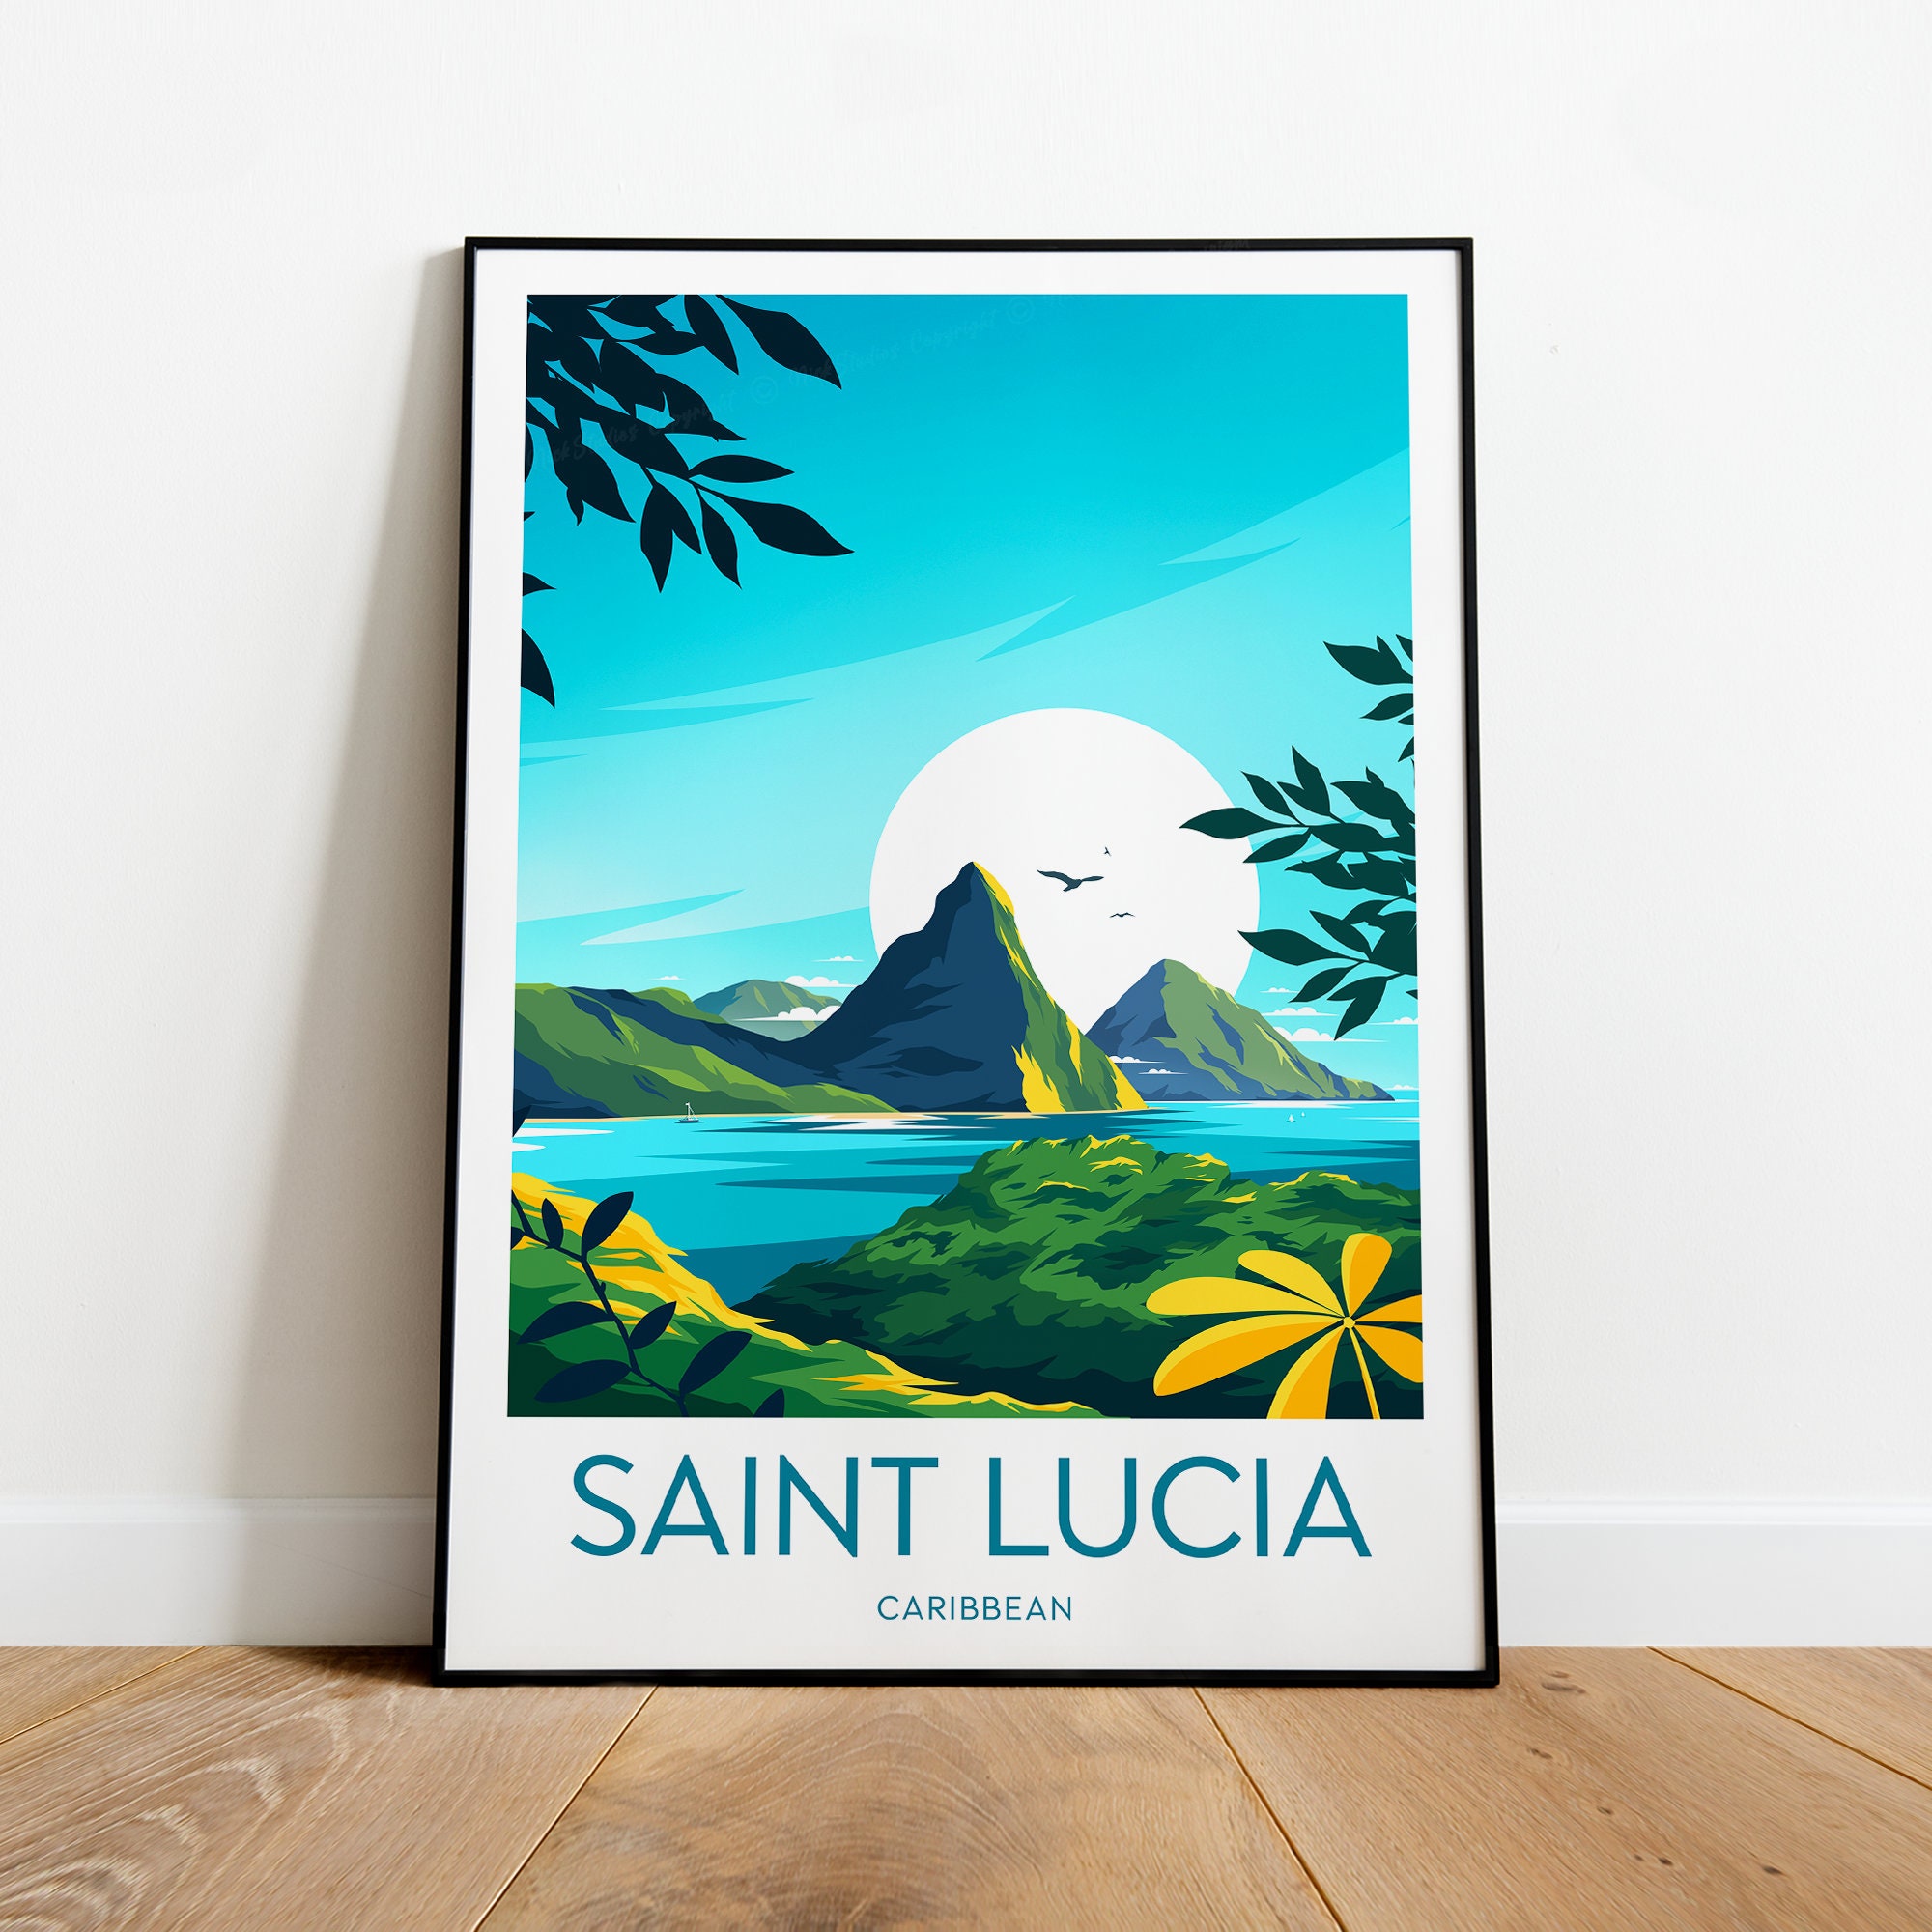 Saint Lucia artists - murals and galleries in St Lucia